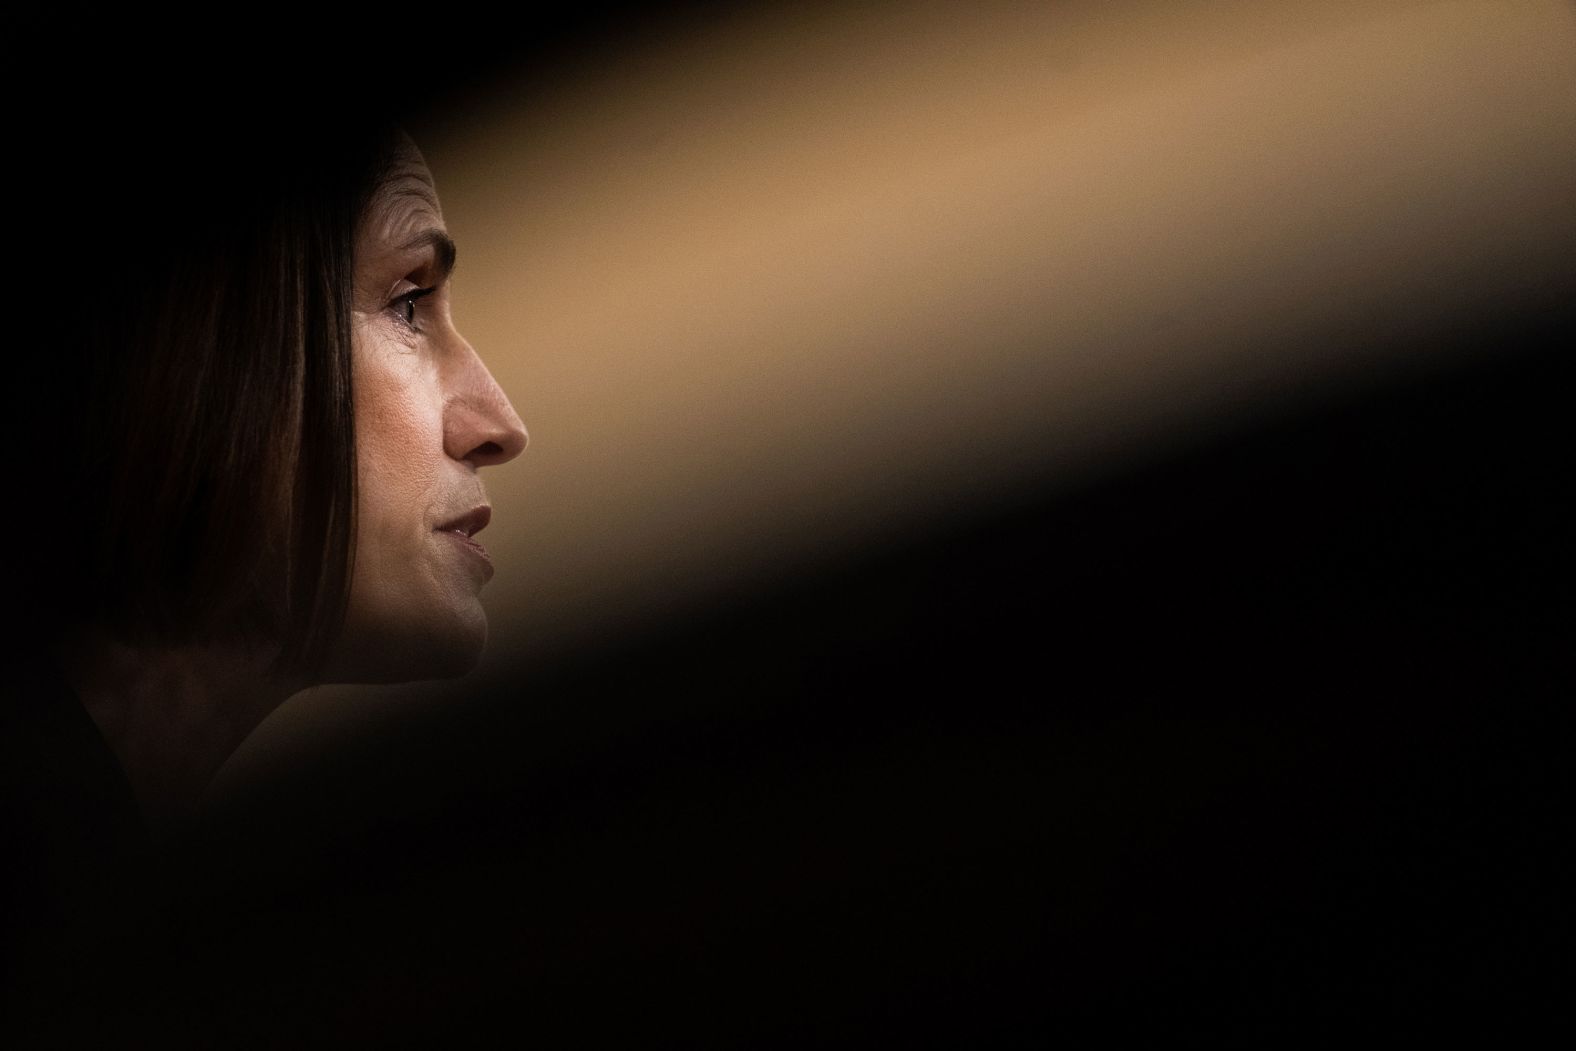 Fiona Hill, Trump's former adviser on Russia and Europe, testifies before the House Intelligence Committee on November 21. <a href="index.php?page=&url=https%3A%2F%2Fwww.cnn.com%2F2019%2F11%2F21%2Fpolitics%2Ffiona-hill-david-holmes-public-impeachment-hearing%2Findex.html" target="_blank">Over five days of public testimony,</a> multiple witnesses testified that the investigations into Trump's political opponents were conditioned on a White House meeting the Ukrainians wanted, as well as the releasing of $400 million in security aid that had been frozen.